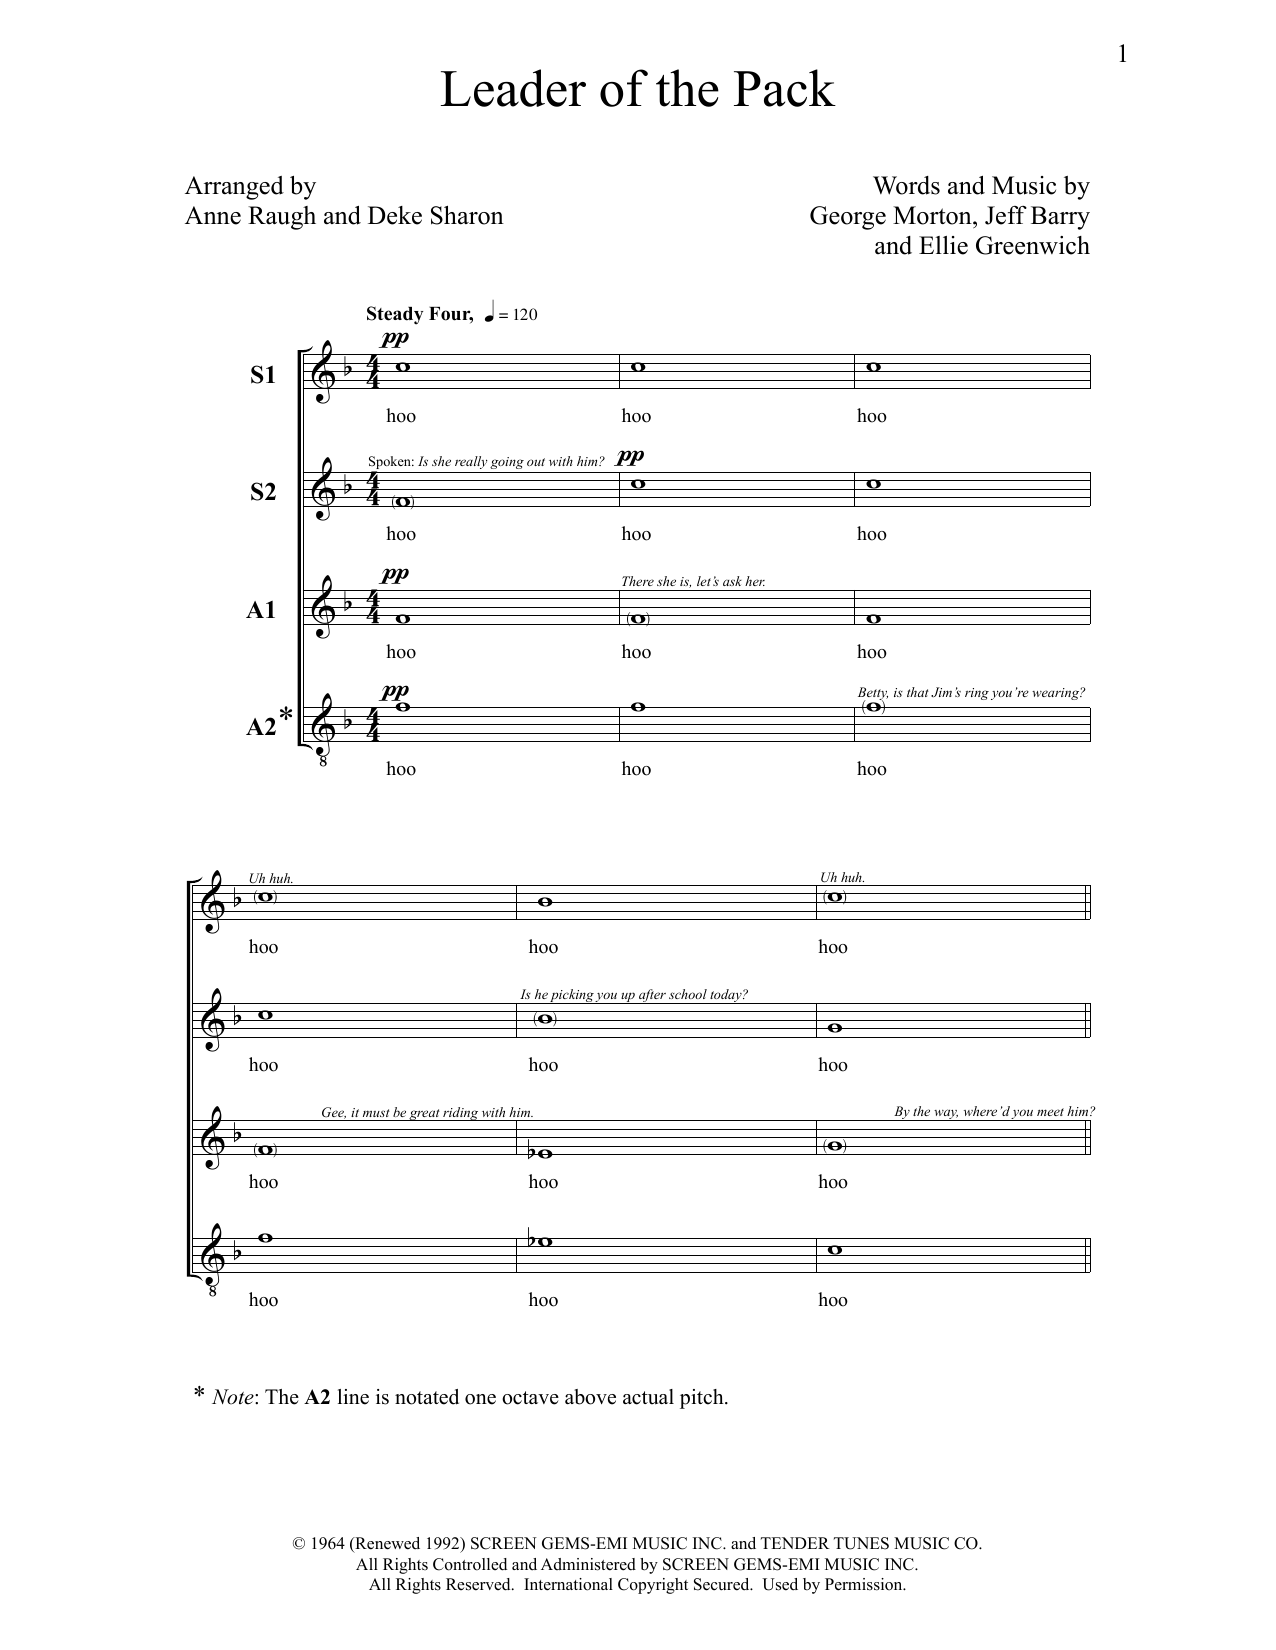 Deke Sharon Leader Of The Pack sheet music notes and chords. Download Printable PDF.